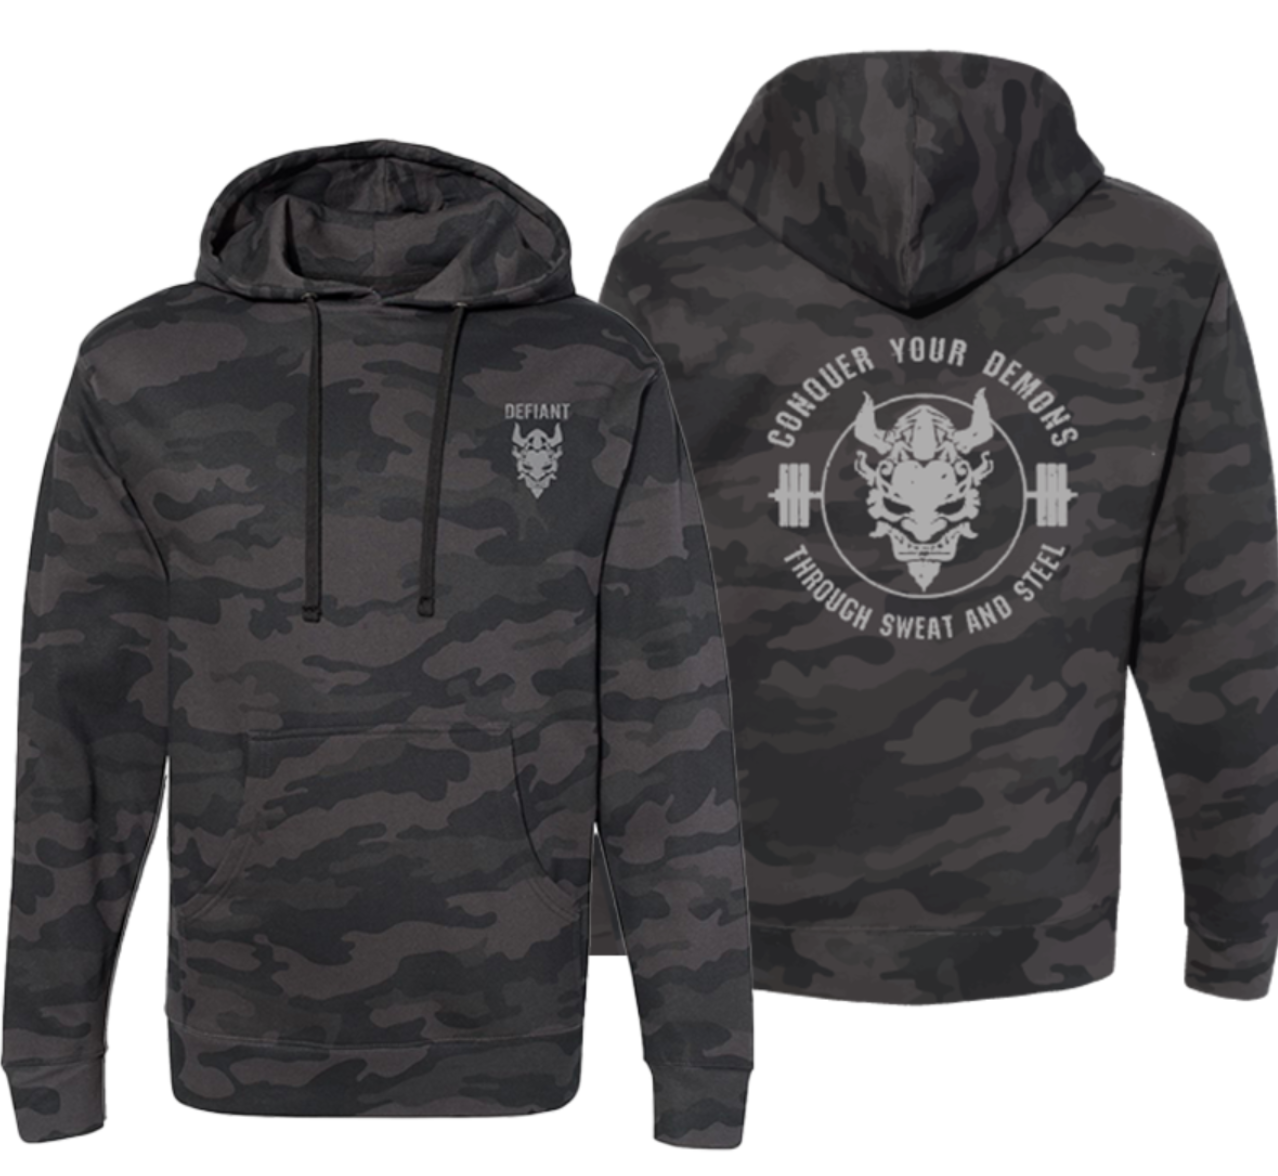 CONQUER YOUR DEMONS - MIDWEIGHT HOODIE - BLACK CAMO